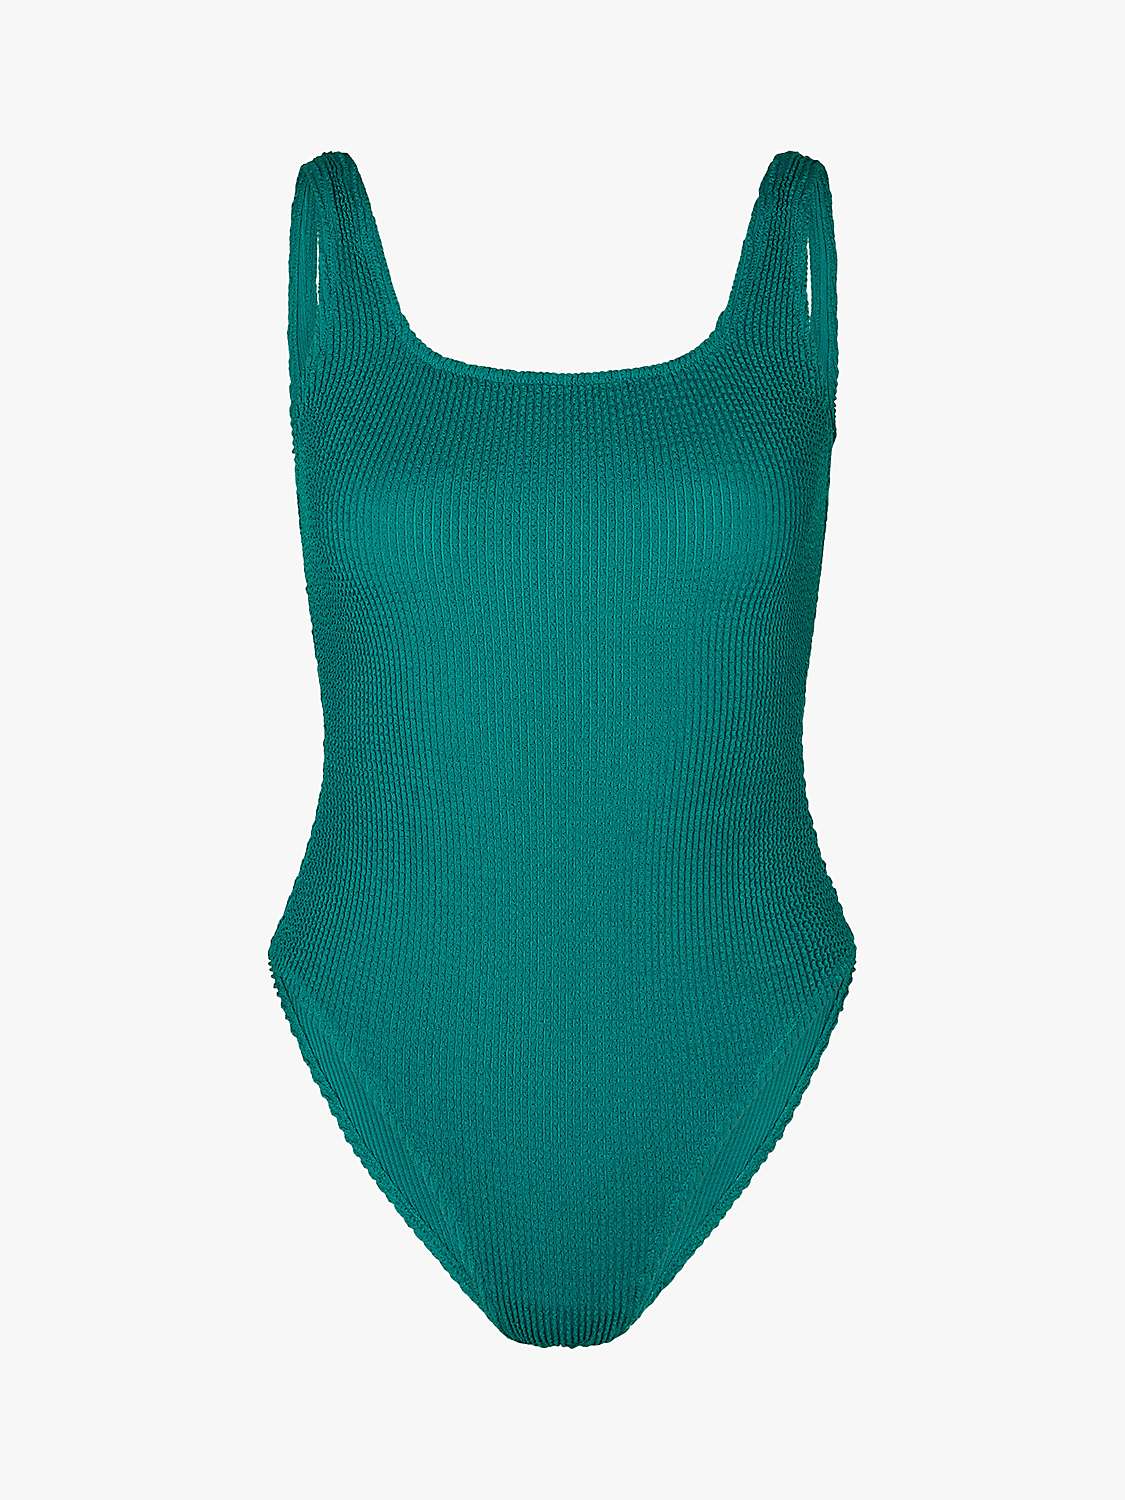 Buy Accessorize Crinkle Swimsuit, Teal Online at johnlewis.com